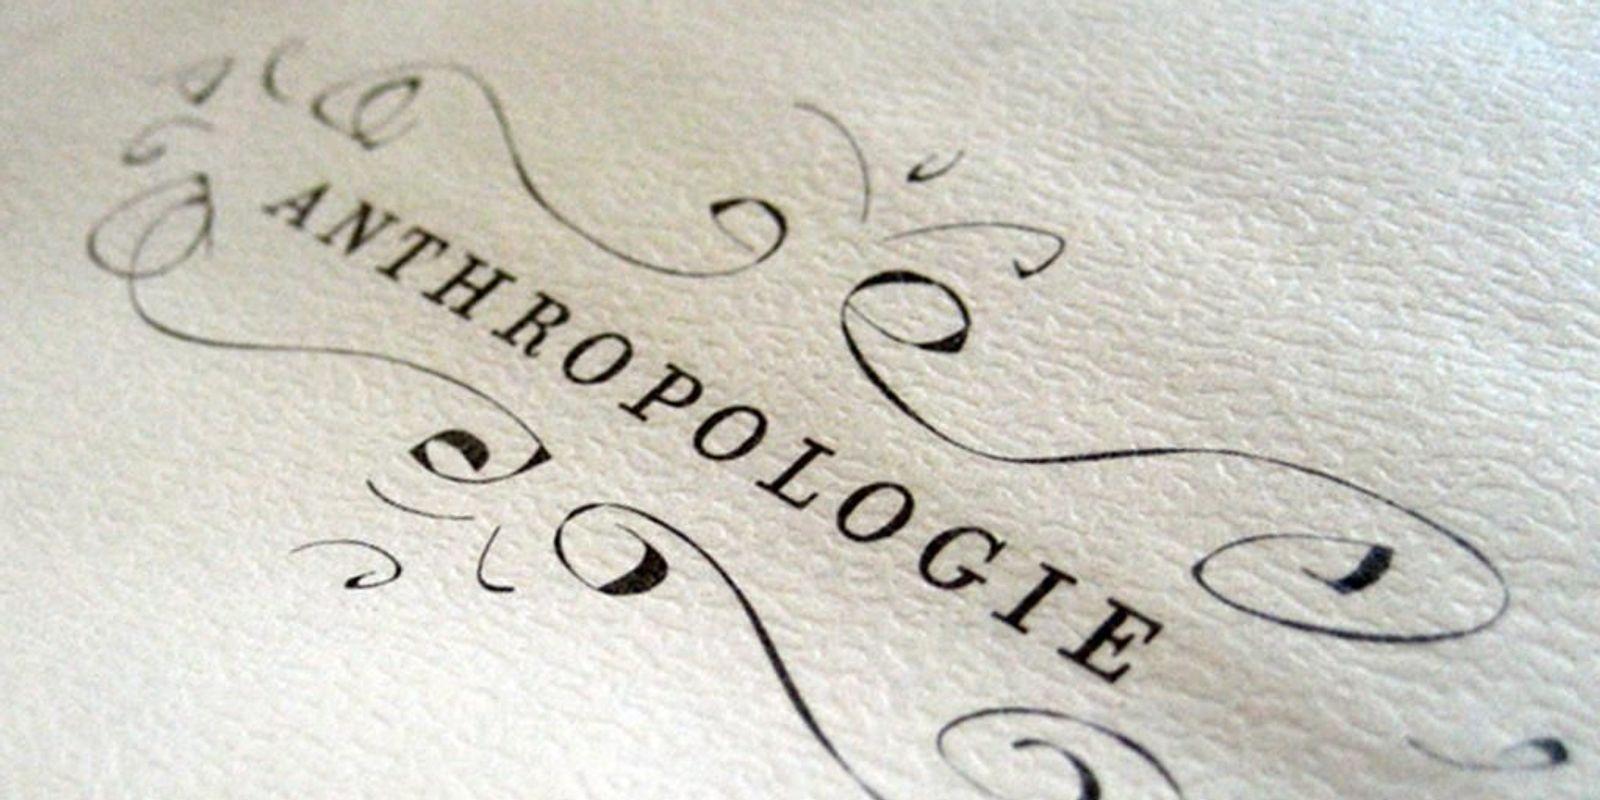 Anthropologie Logo - Anthropologie is coming to Asheville, say permits